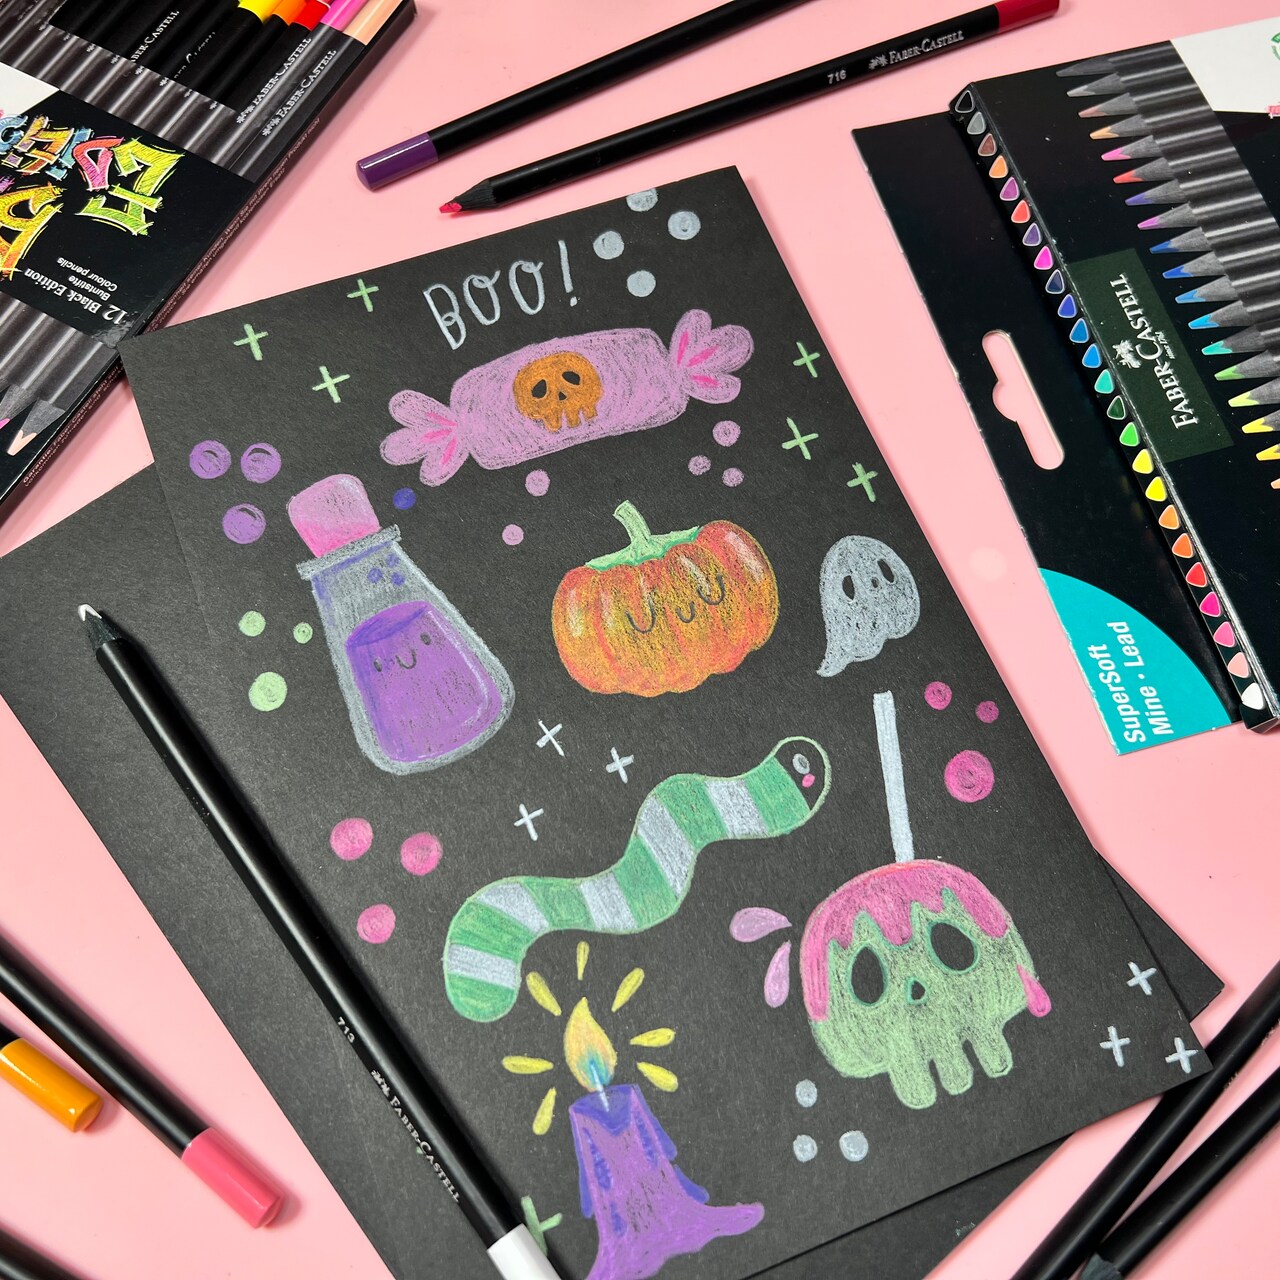 Halloween Doodling with Super Soft Black Edition Colored Pencils from Faber-Castell®